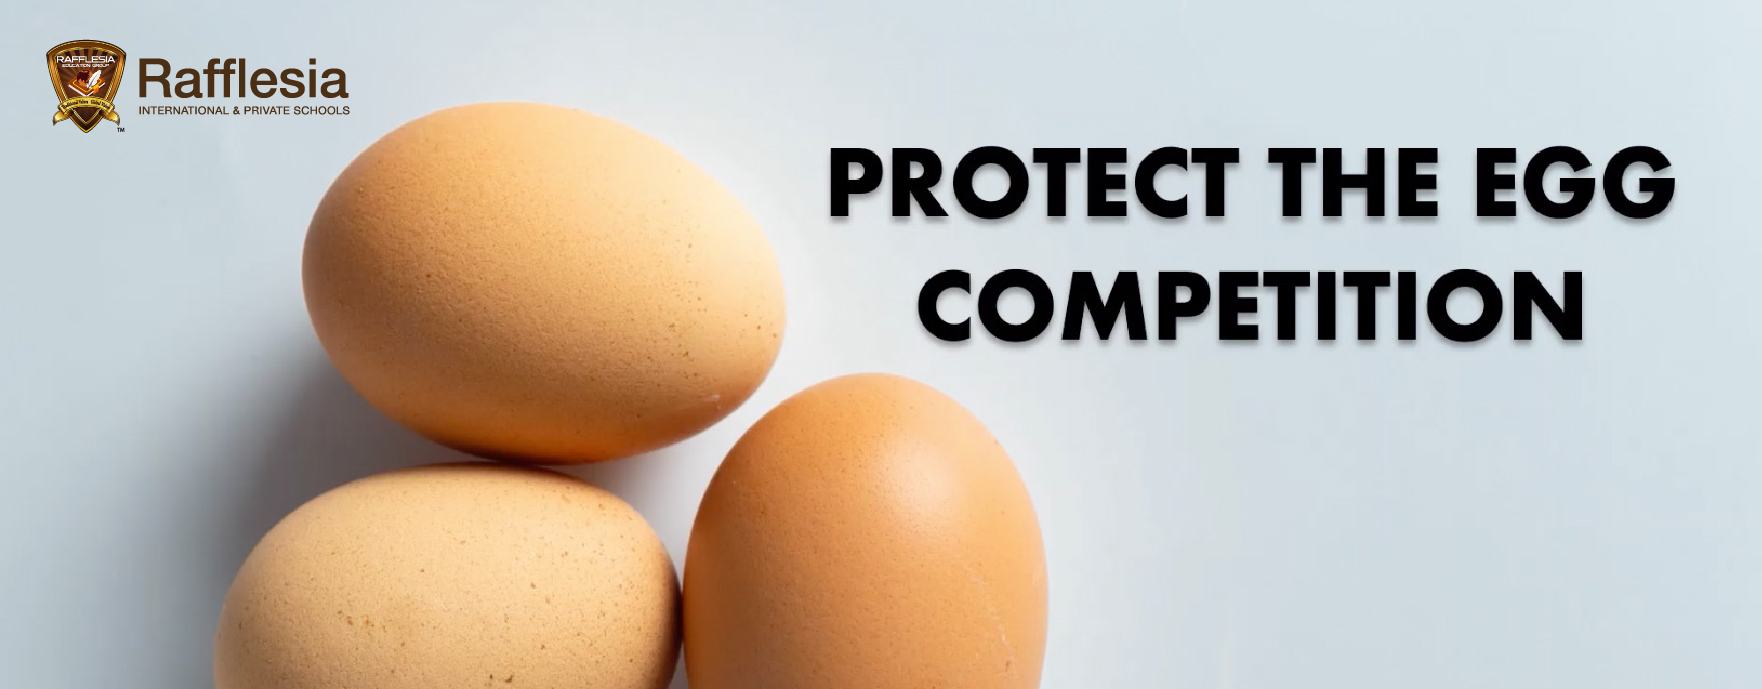 Protect the Egg Competition